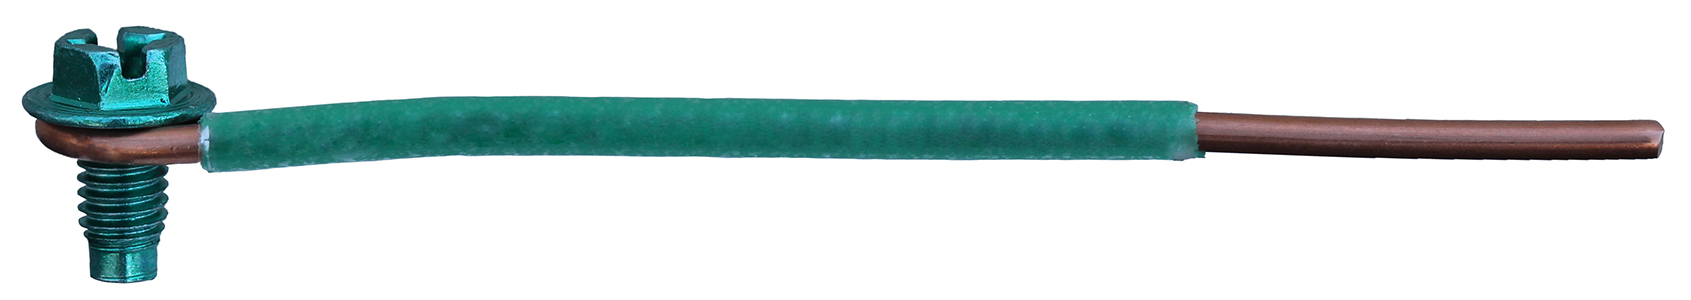 Ground Pigtail, 7-1/2 in. Size, 12 GA thickness